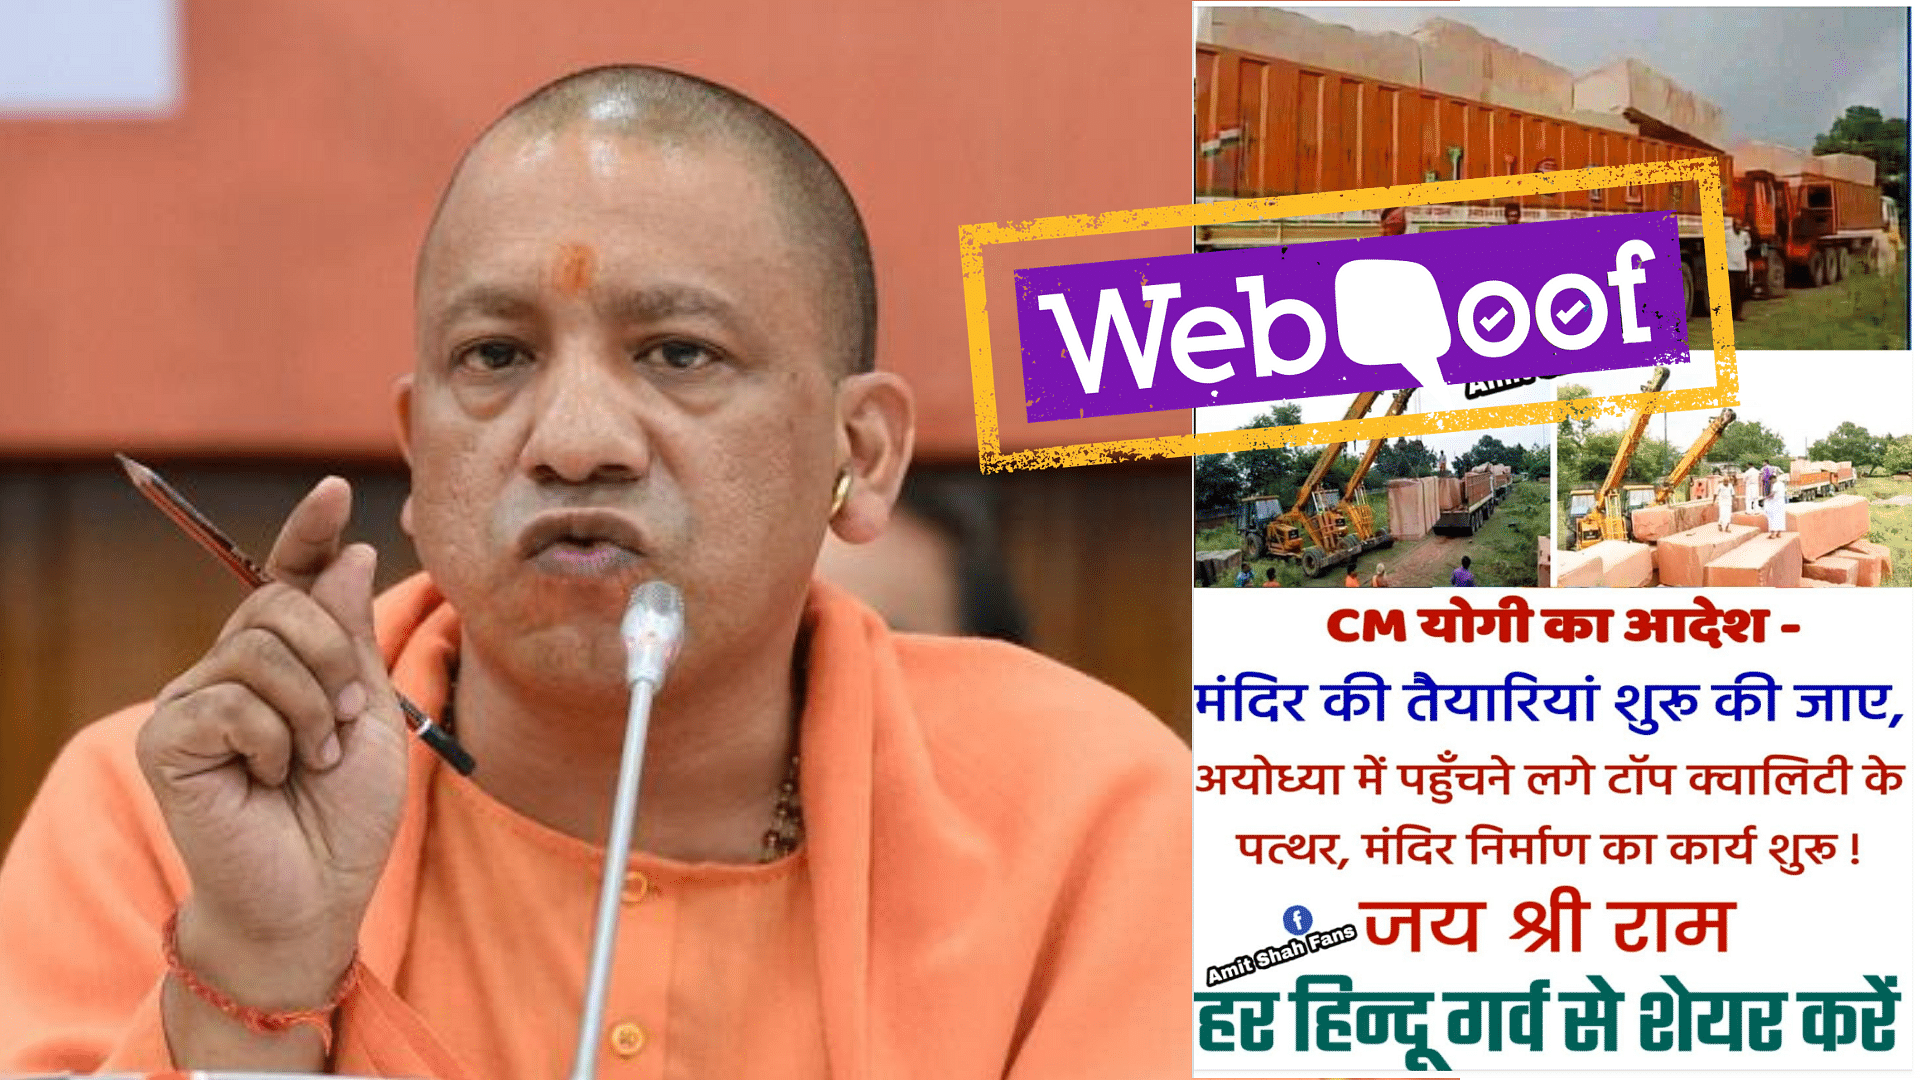 Yogi Adityanath had only said the date for the construction of the temple had been set by Lord Ram himself.